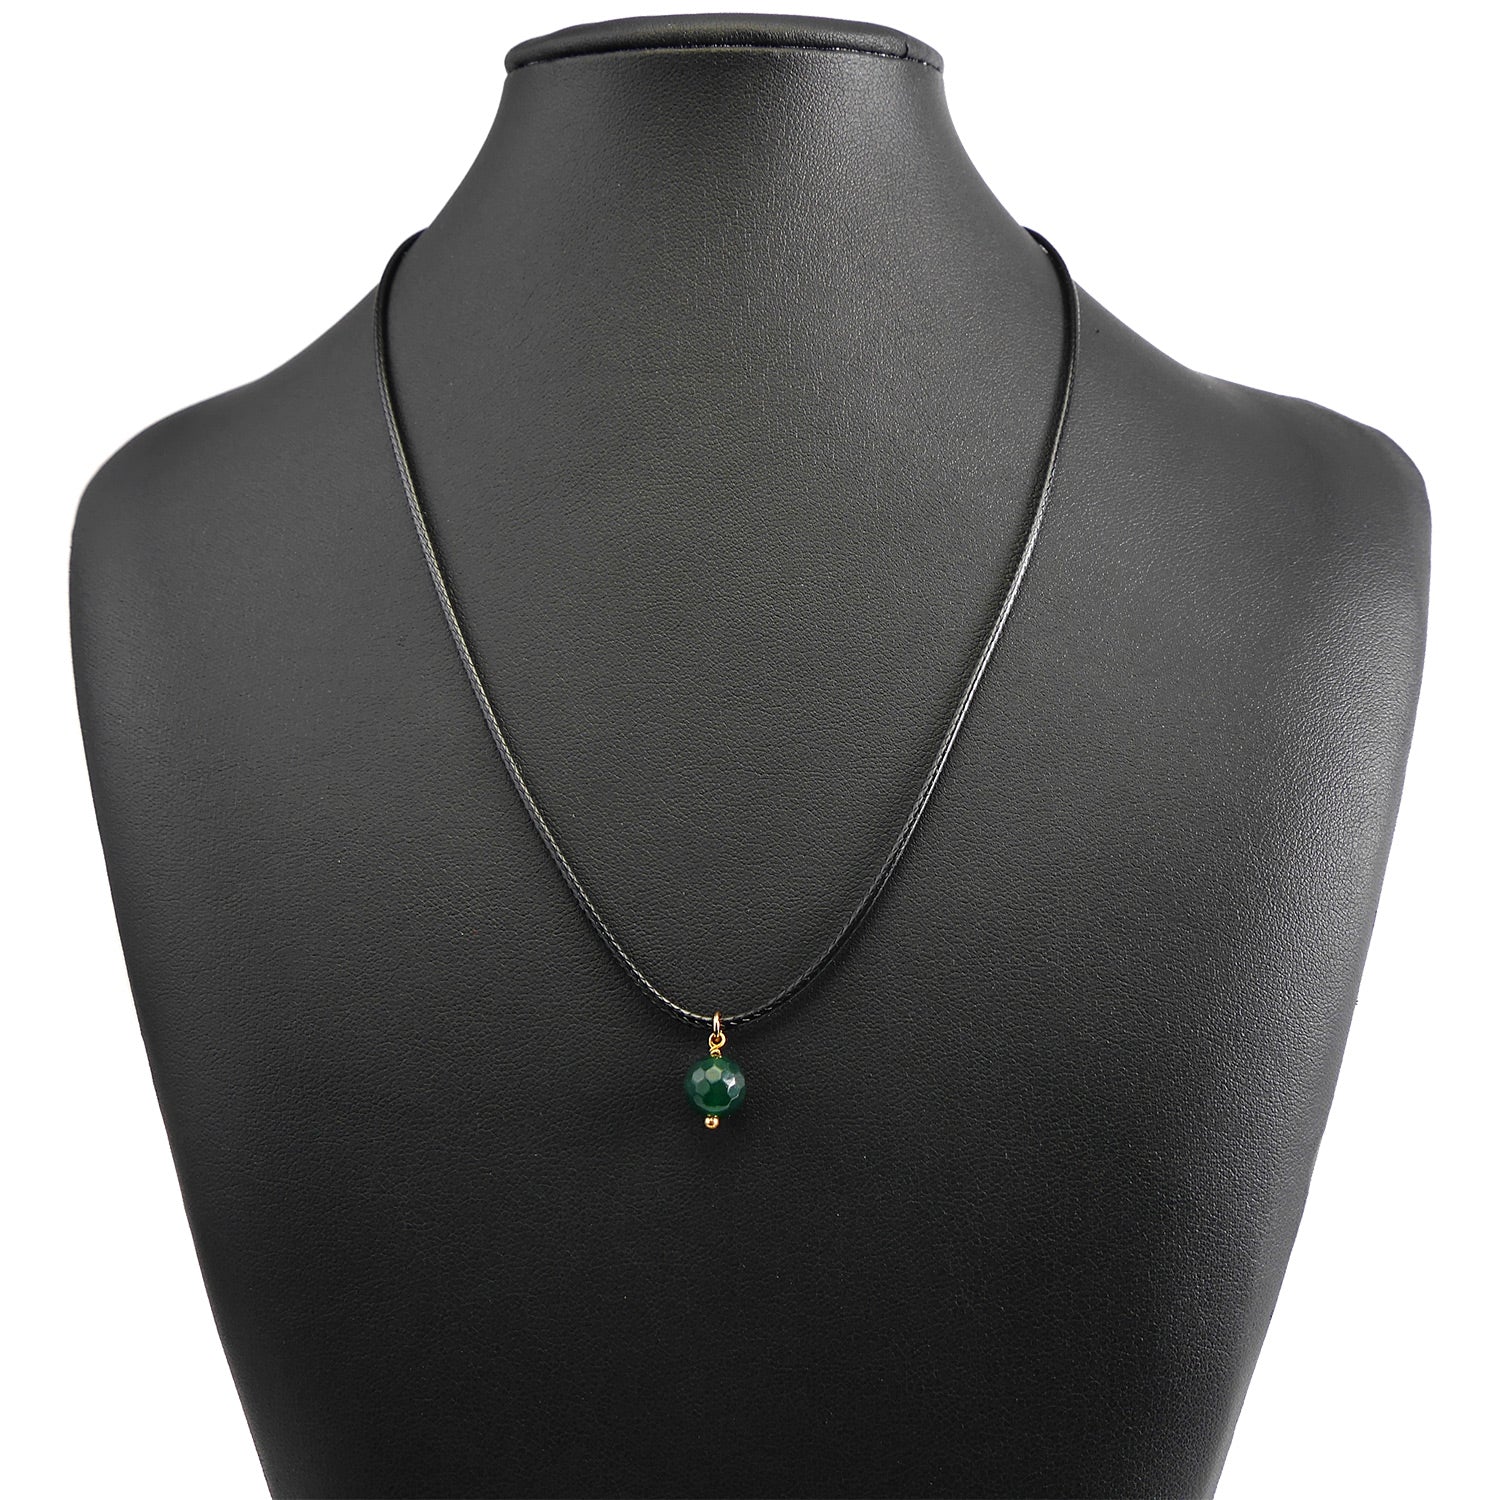 Faux Leather Necklace with Deep Green Crystal